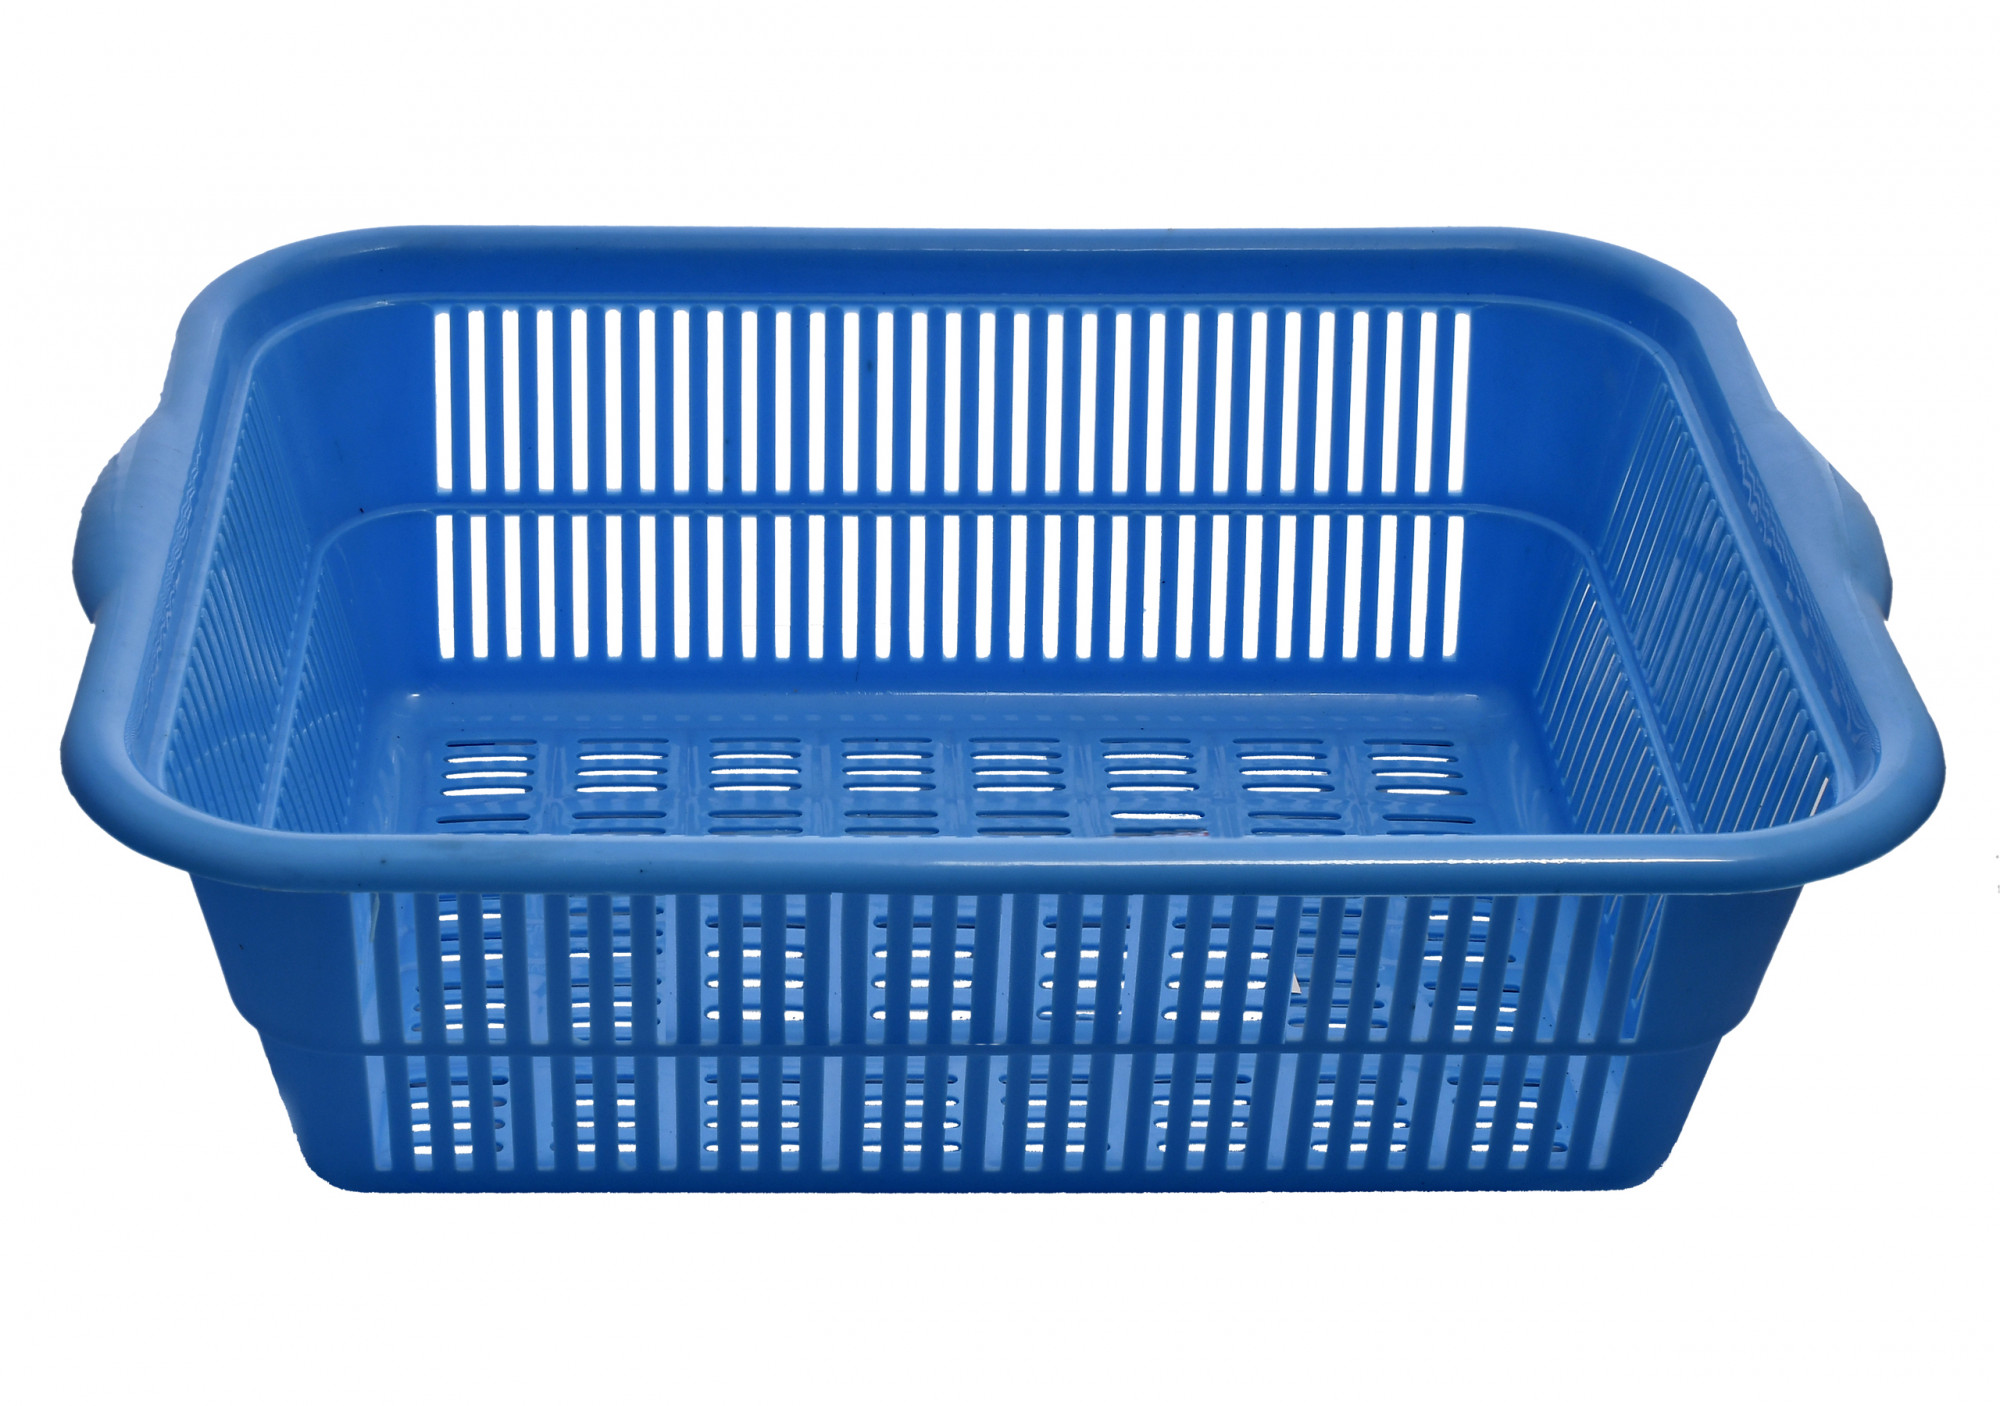 Kuber Industries Plastic Kitchen Dish Rack Drainer Vegetables And Fruits Basket Dish Rack Multipurpose Organizers ,Small Size,Blue & Red